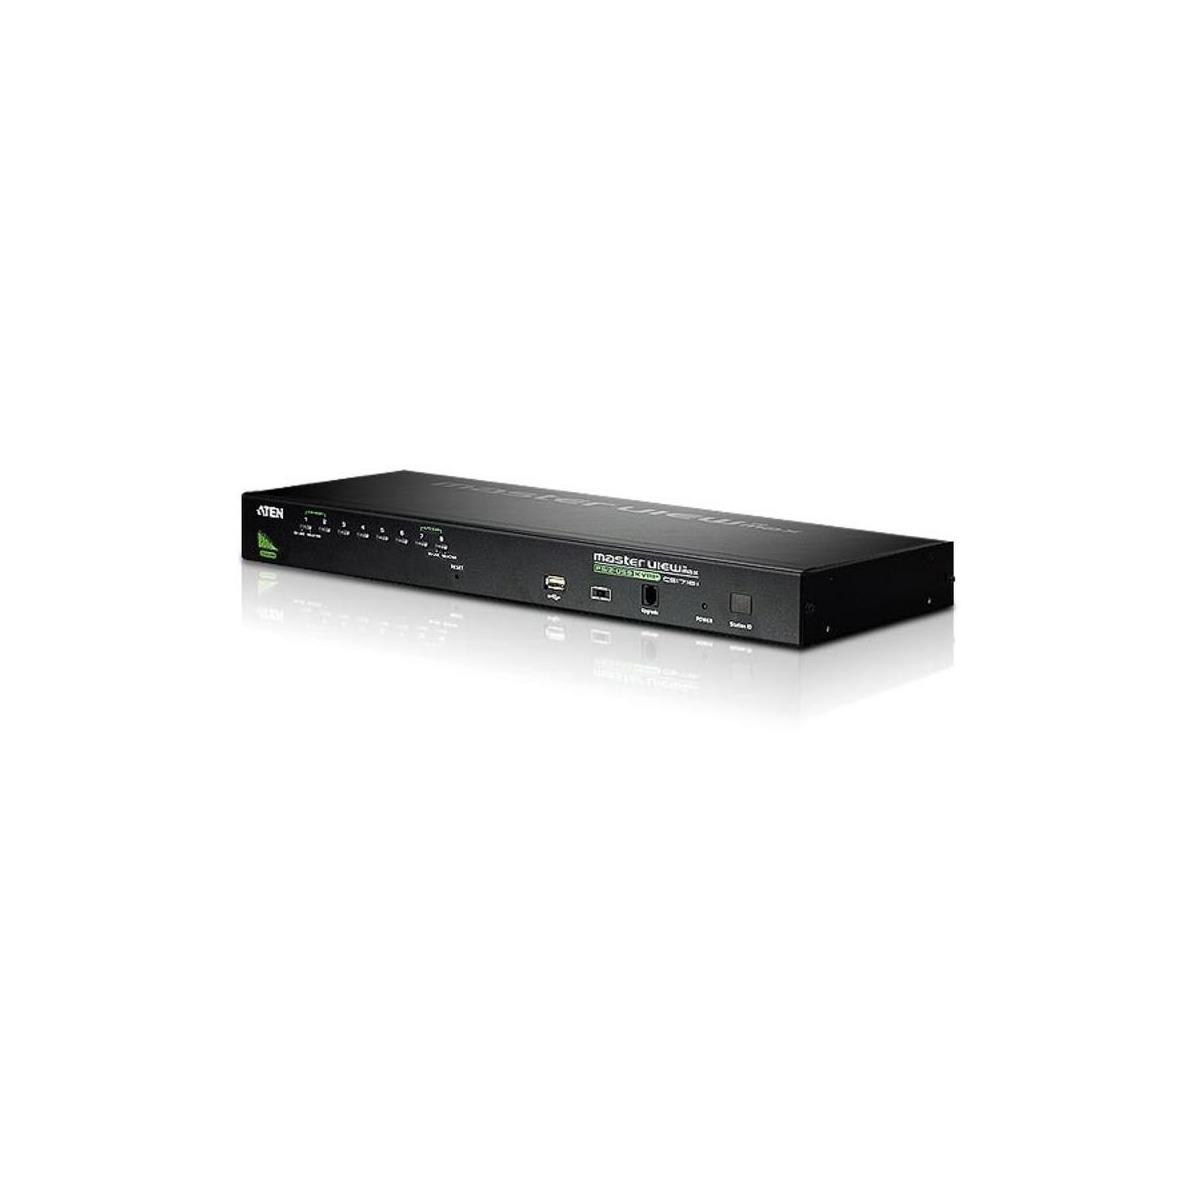 8-Port PS/2-USB KVM Switch Control Unit with USB Peripheral Support - Aten CS1708A